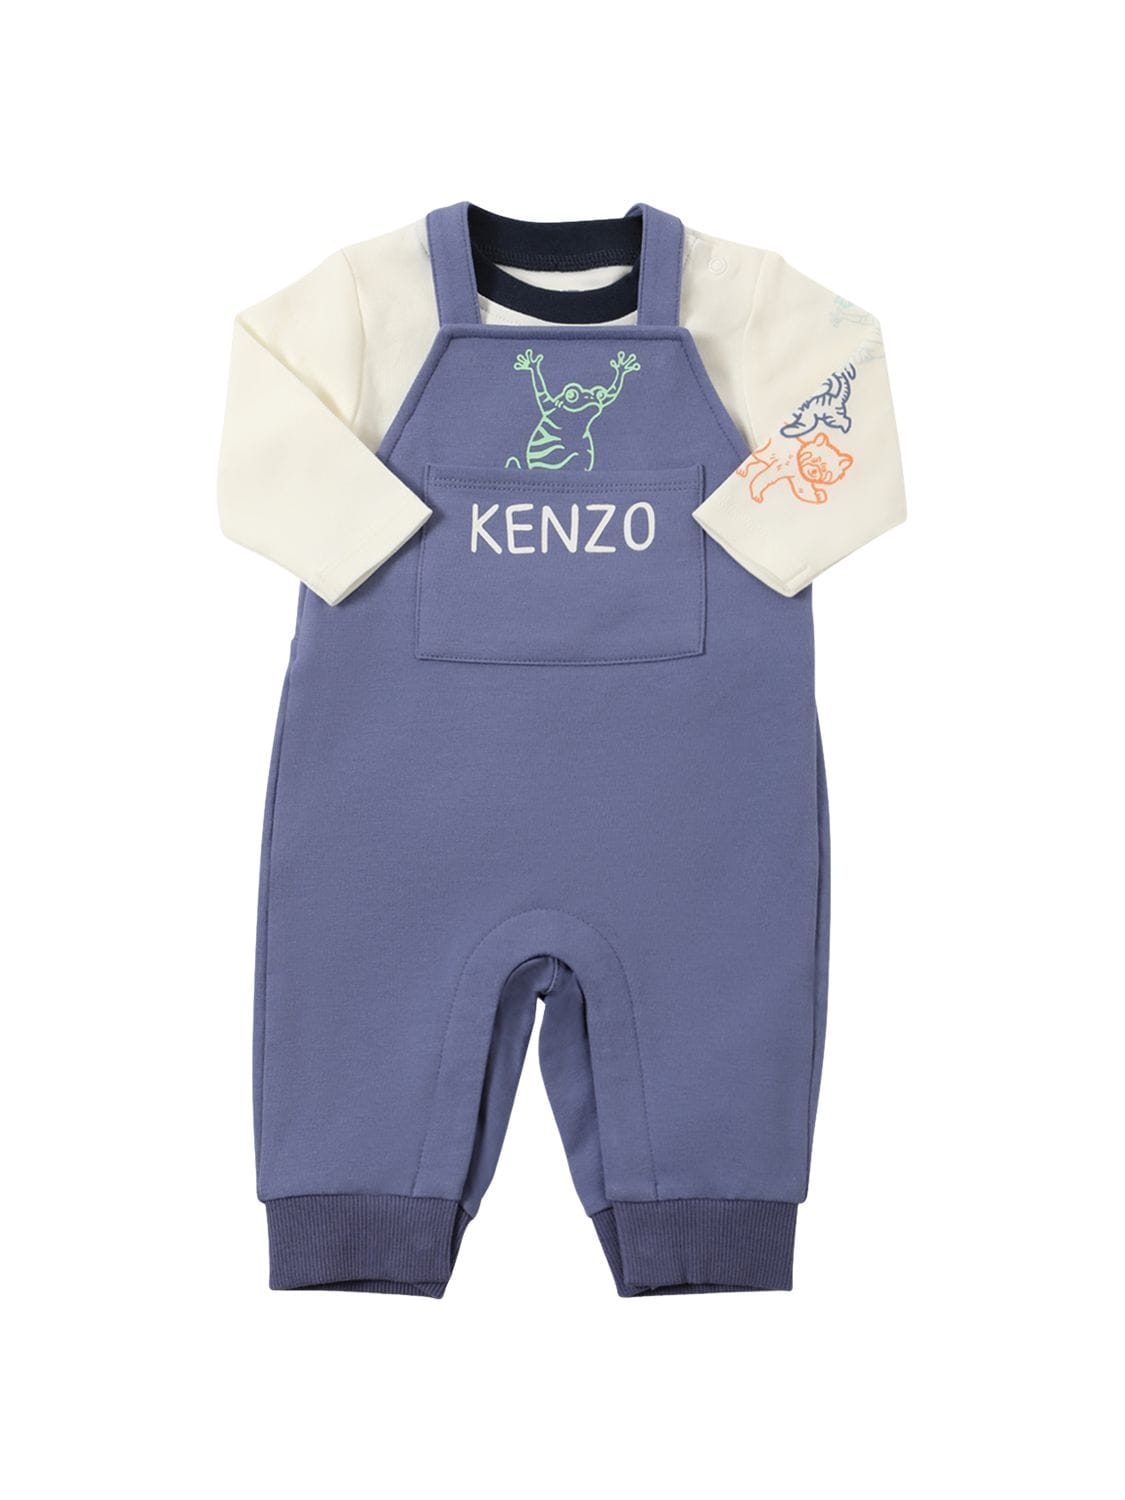 Kenzo Babies' 2-in-1 Organic Cotton T-shirt & Overalls In Blue